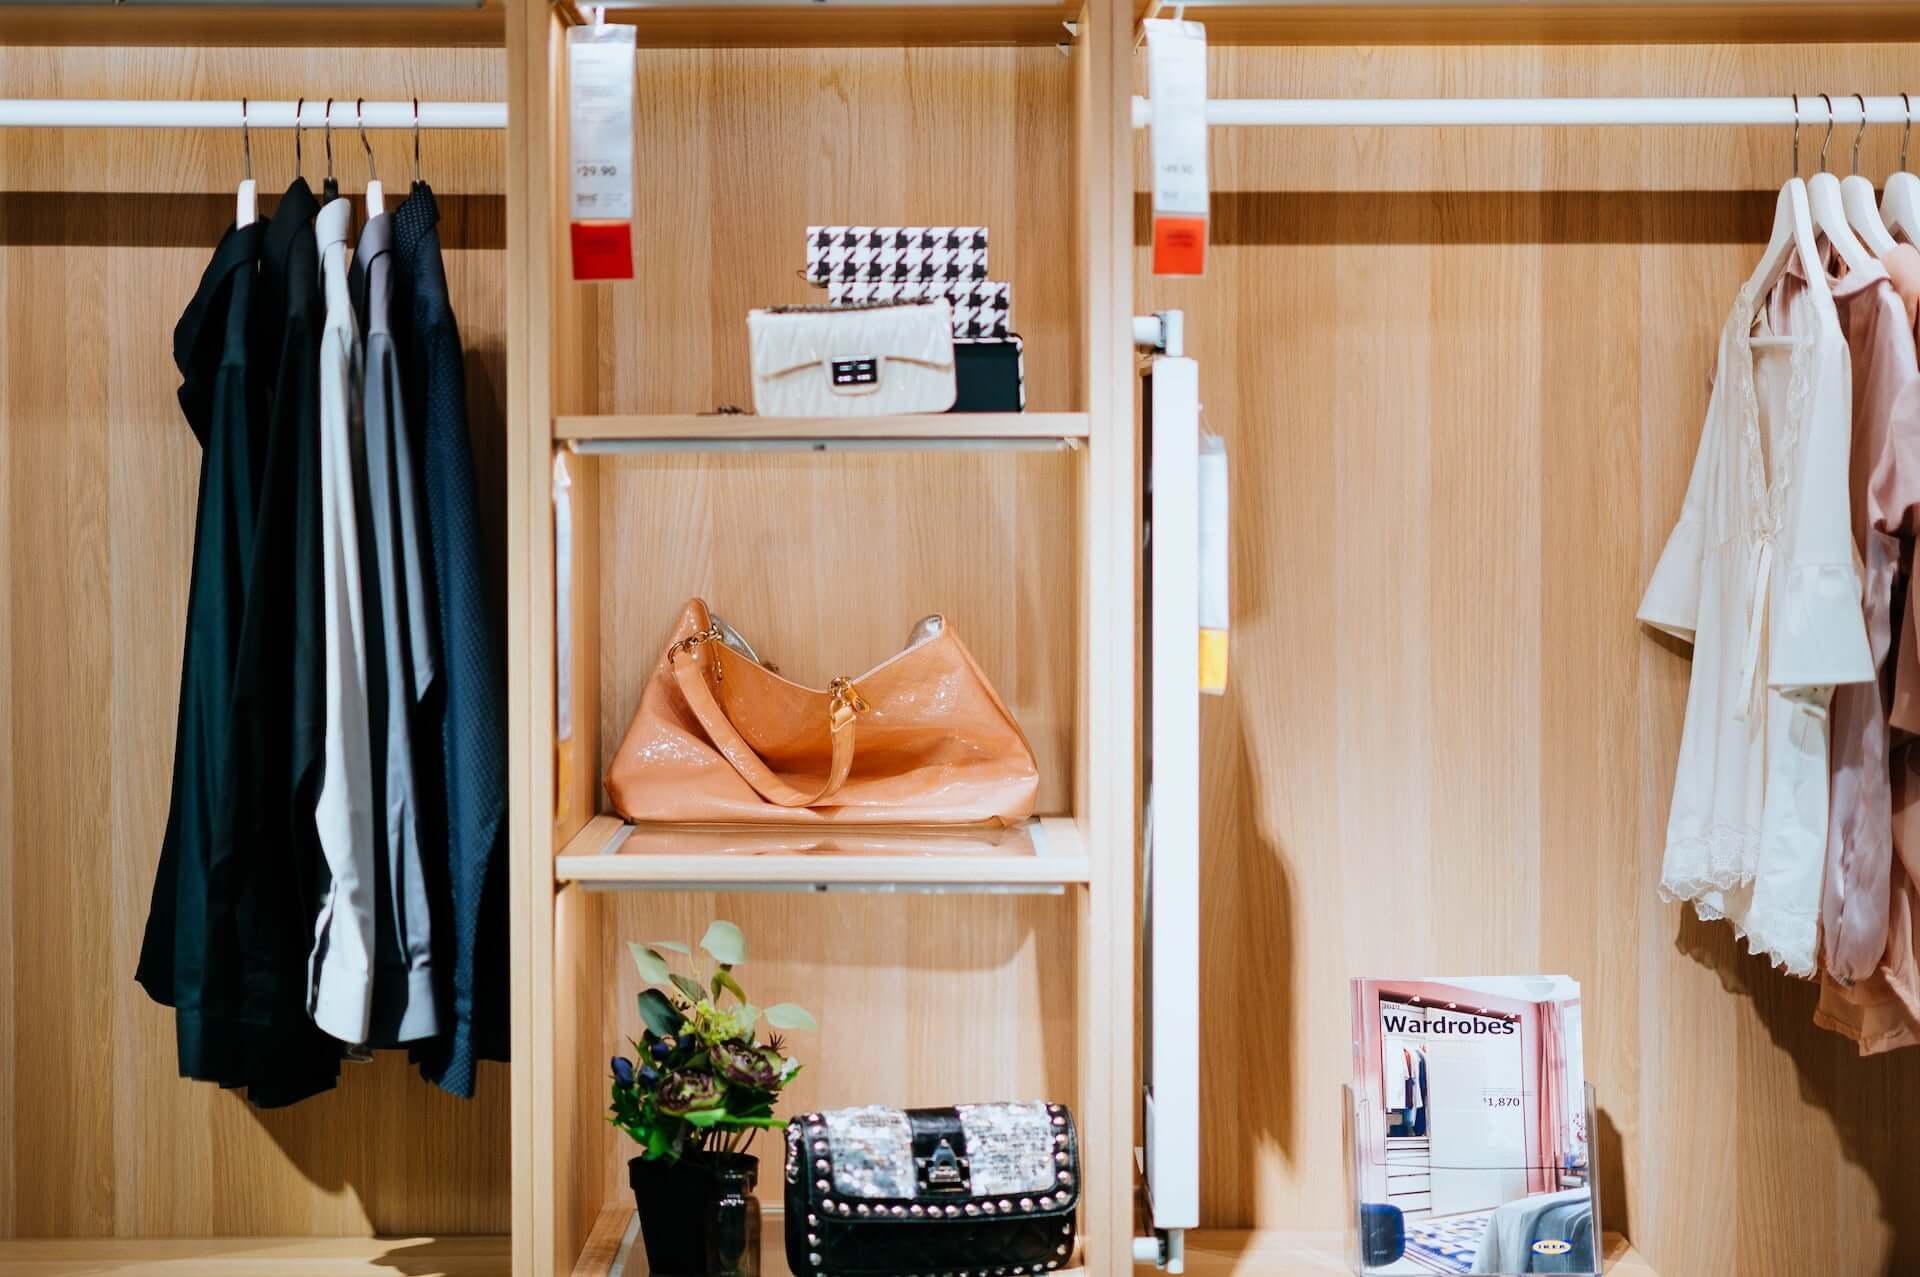 A simple and organized closet full of women's clothes and accessories.